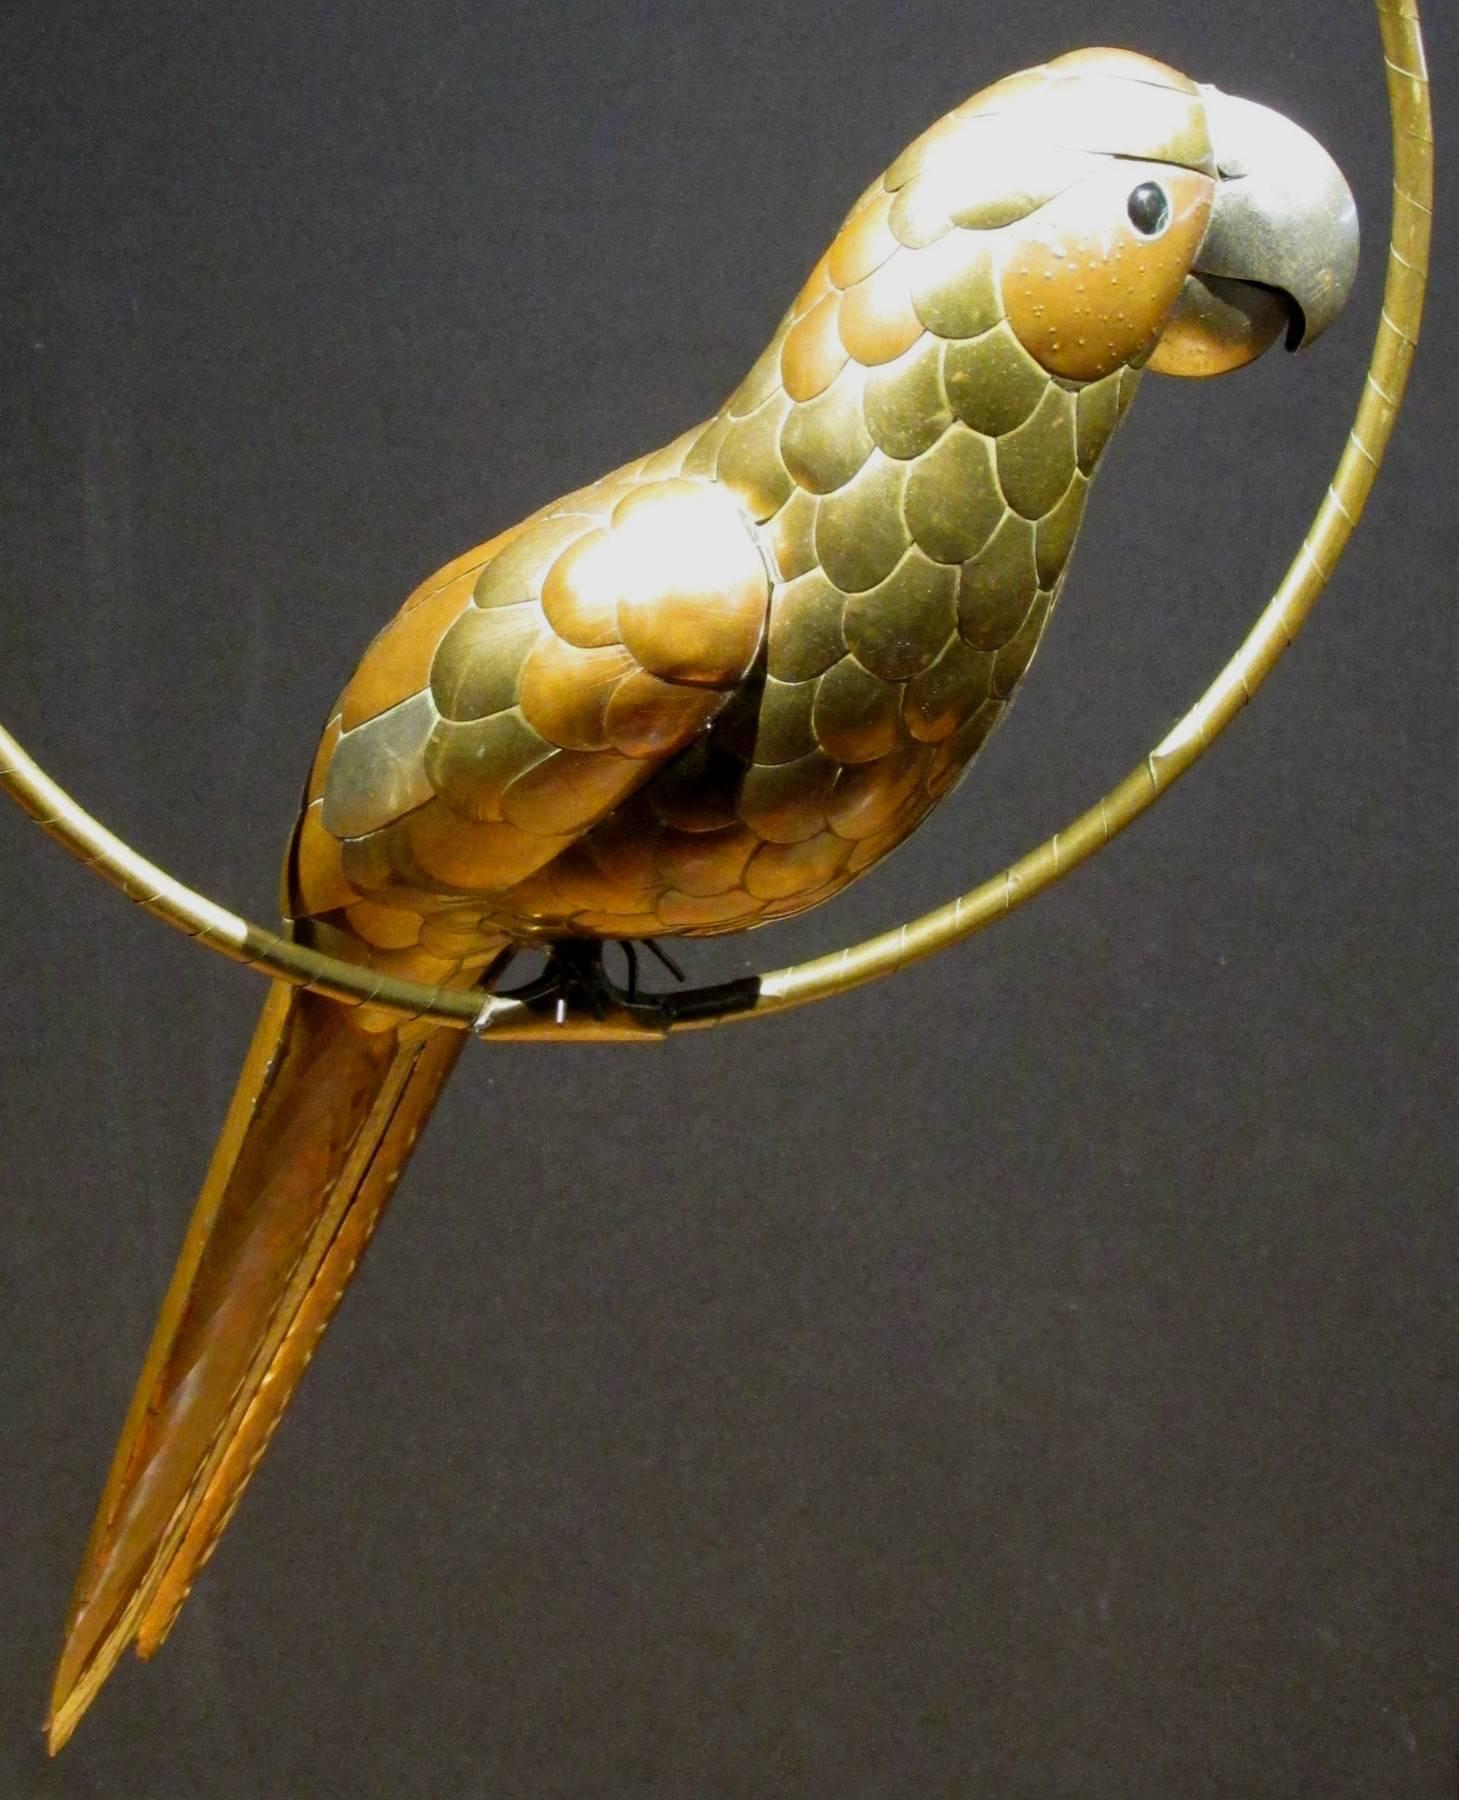 A whimsical Mid-Century Modern figure of a hanging brass and copper parrot, having a silvered beak and glass eyes, perched within its original circular copper hoop.
Measures: Length of parrot is 17", the hoop diameter is 11"